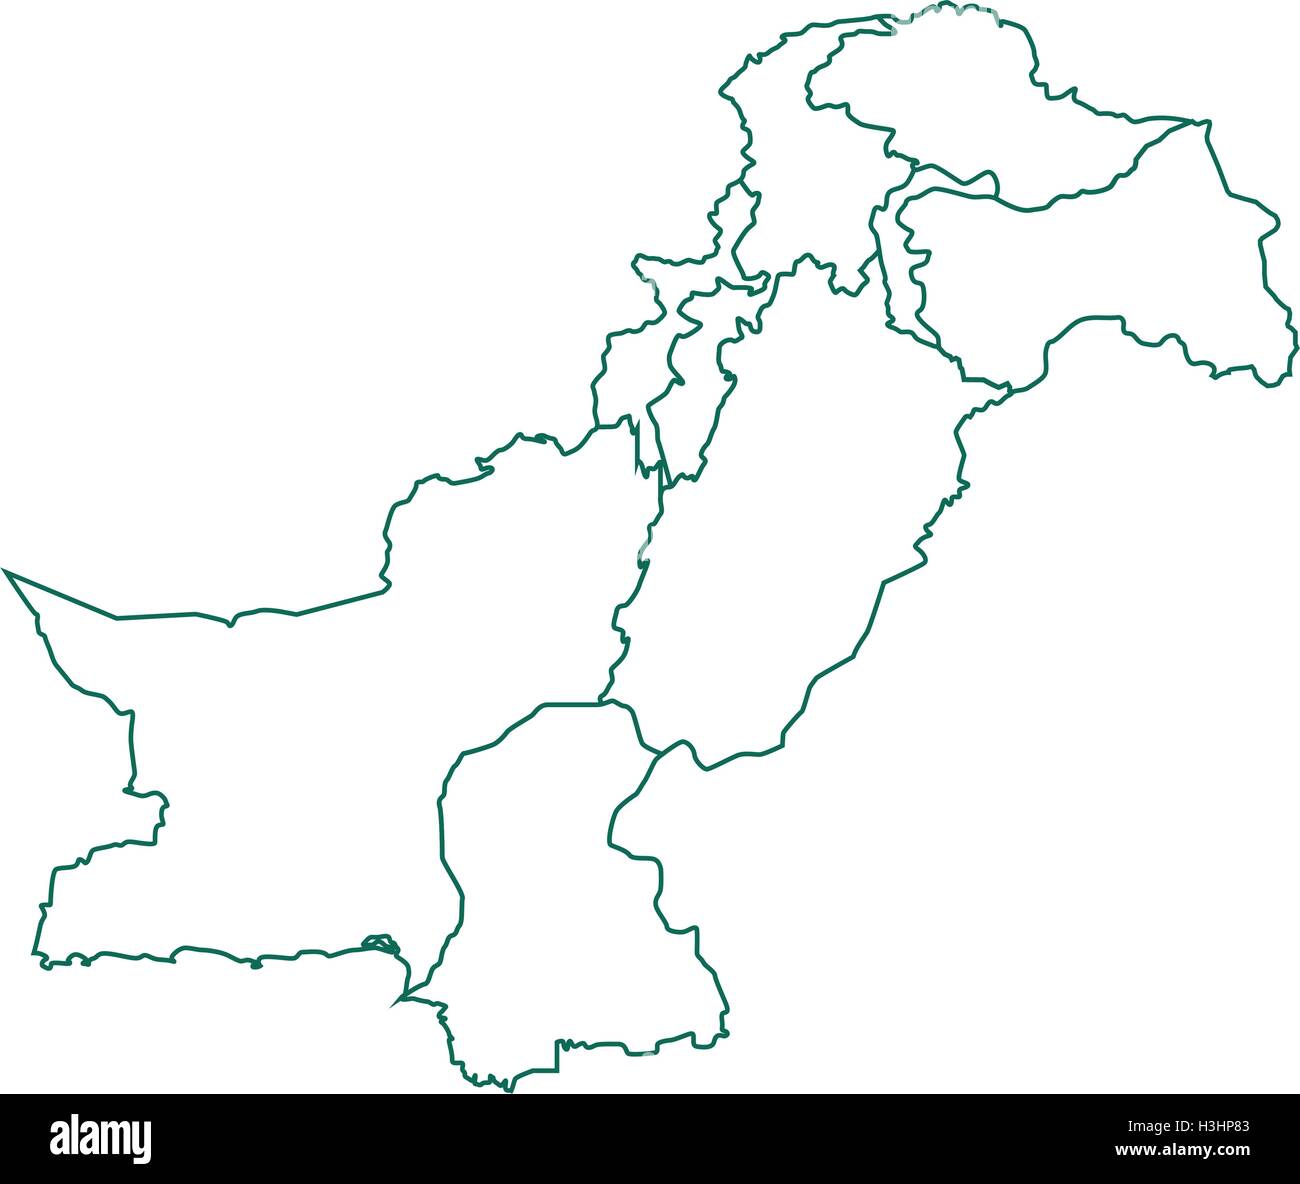 Pakistan map with all states and provinces Stock Vector